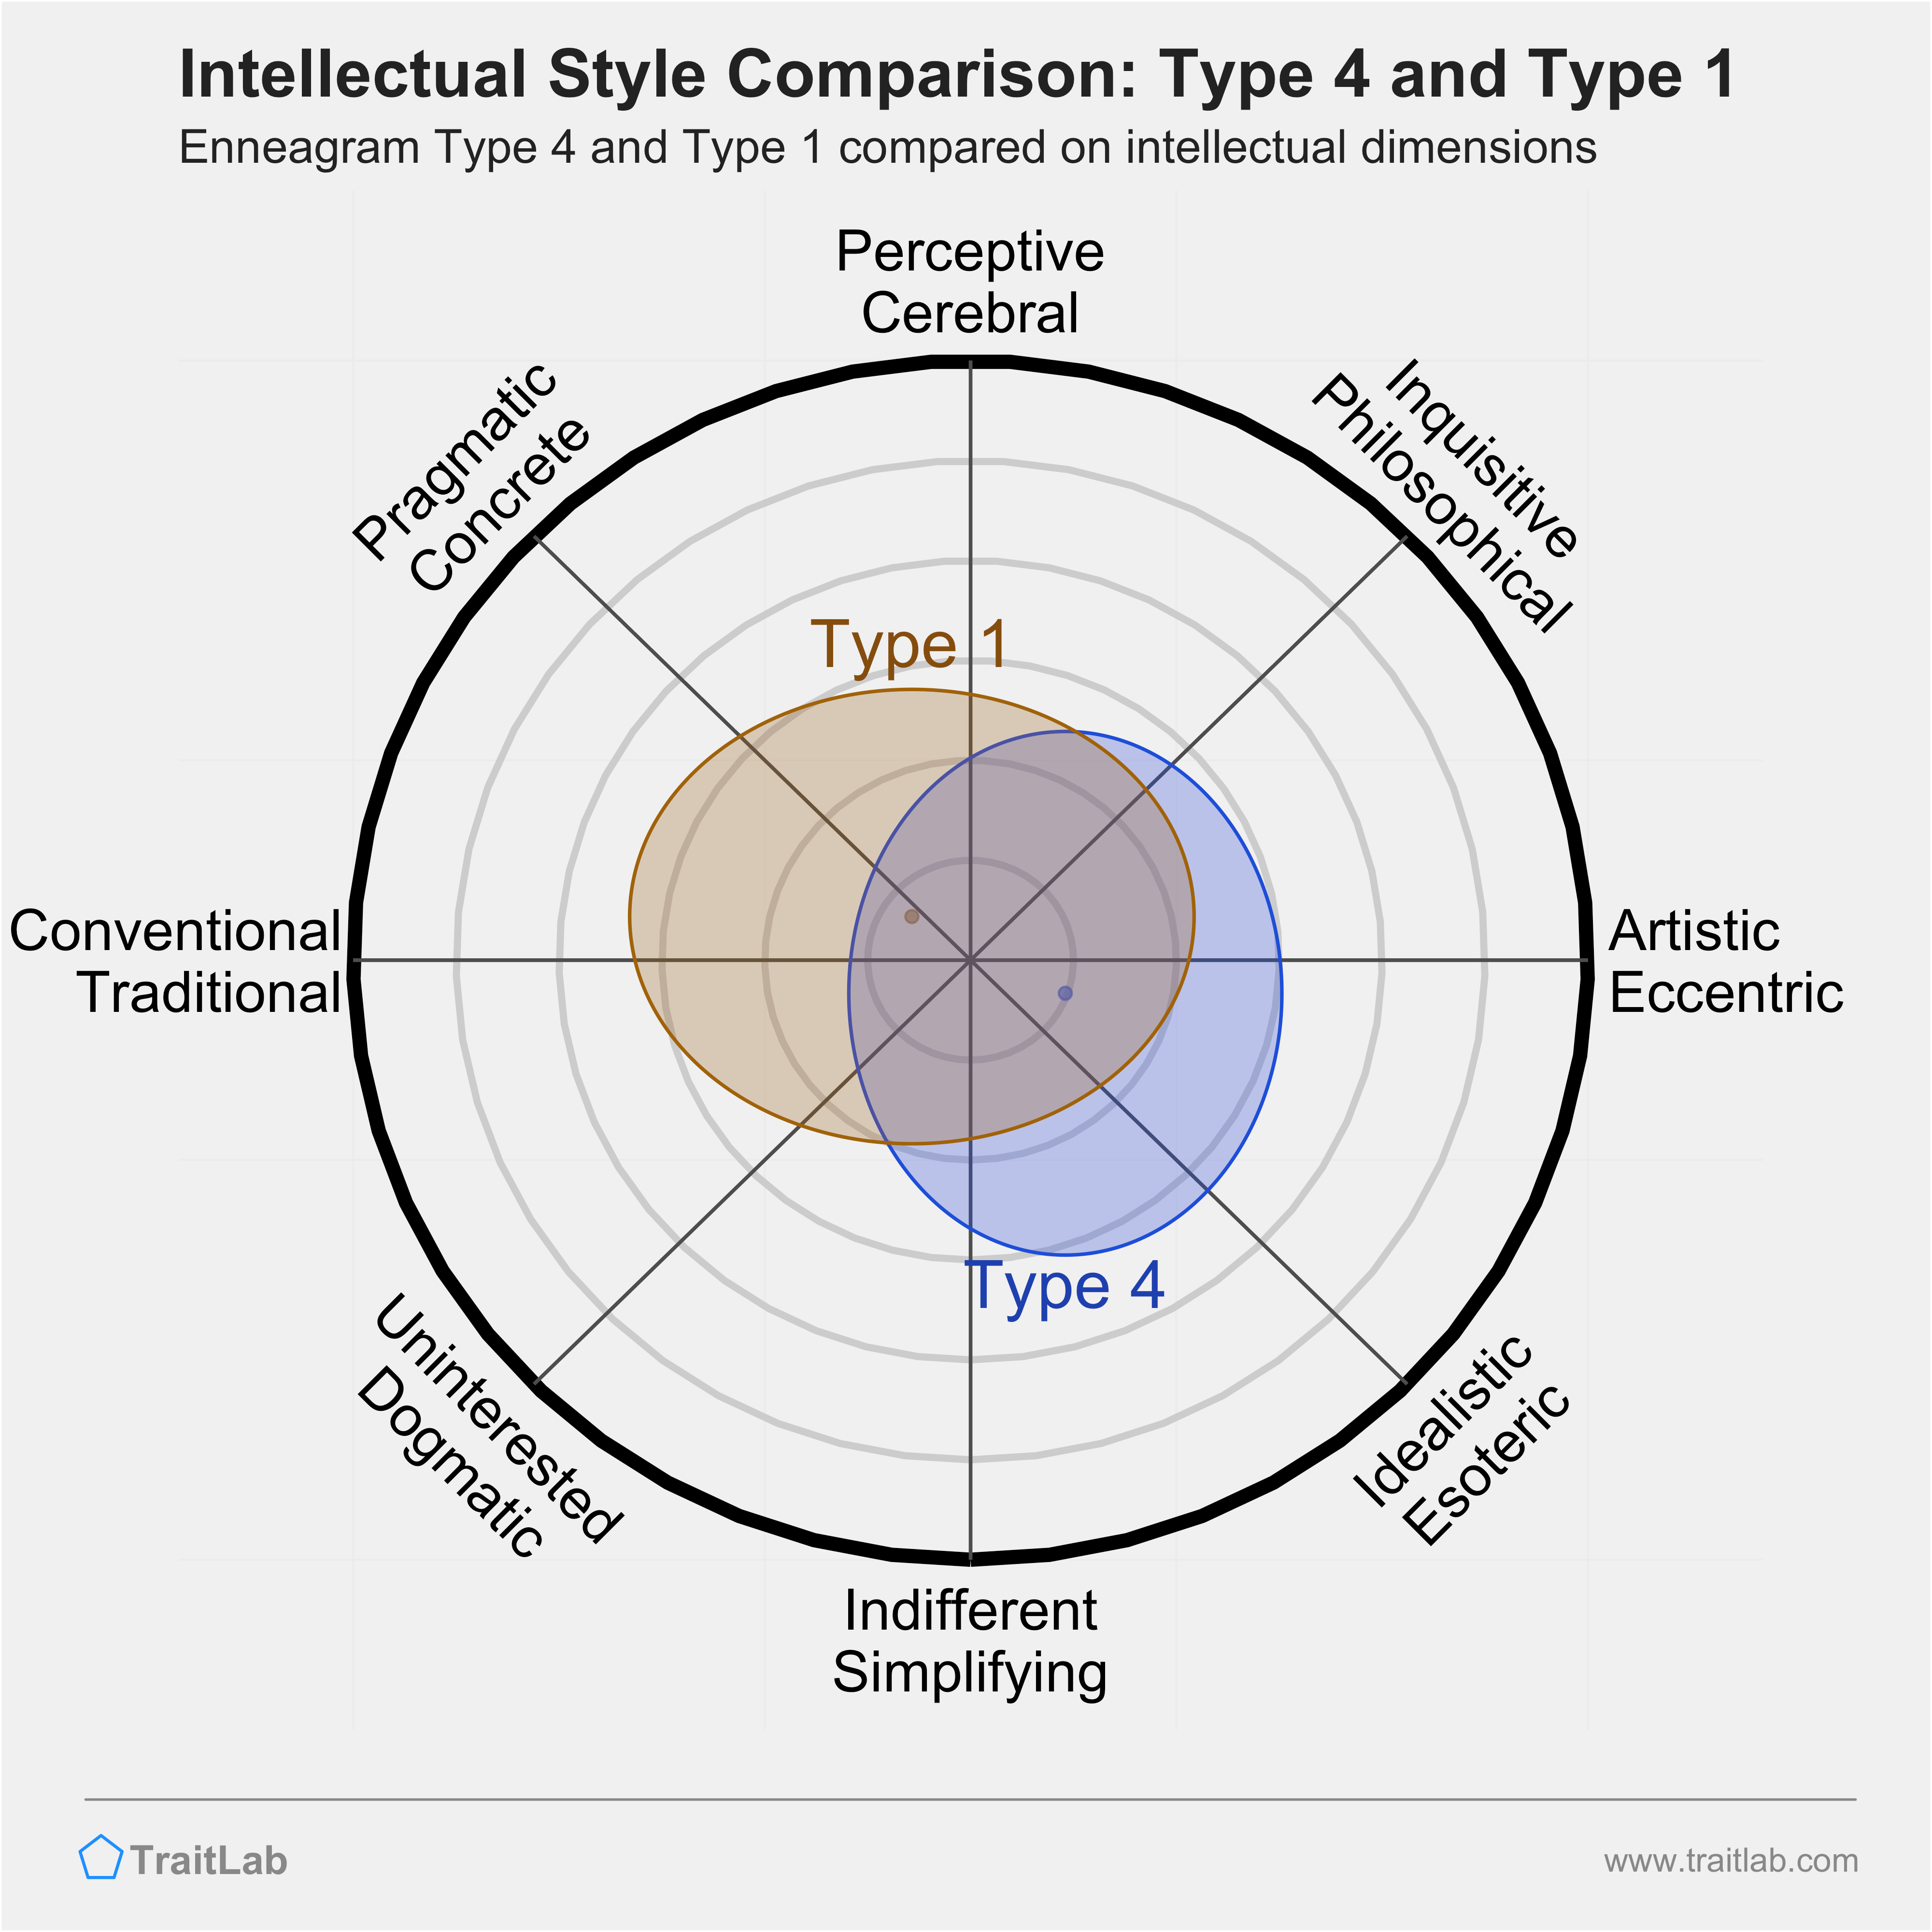 Type 4 and Type 1 comparison across intellectual dimensions